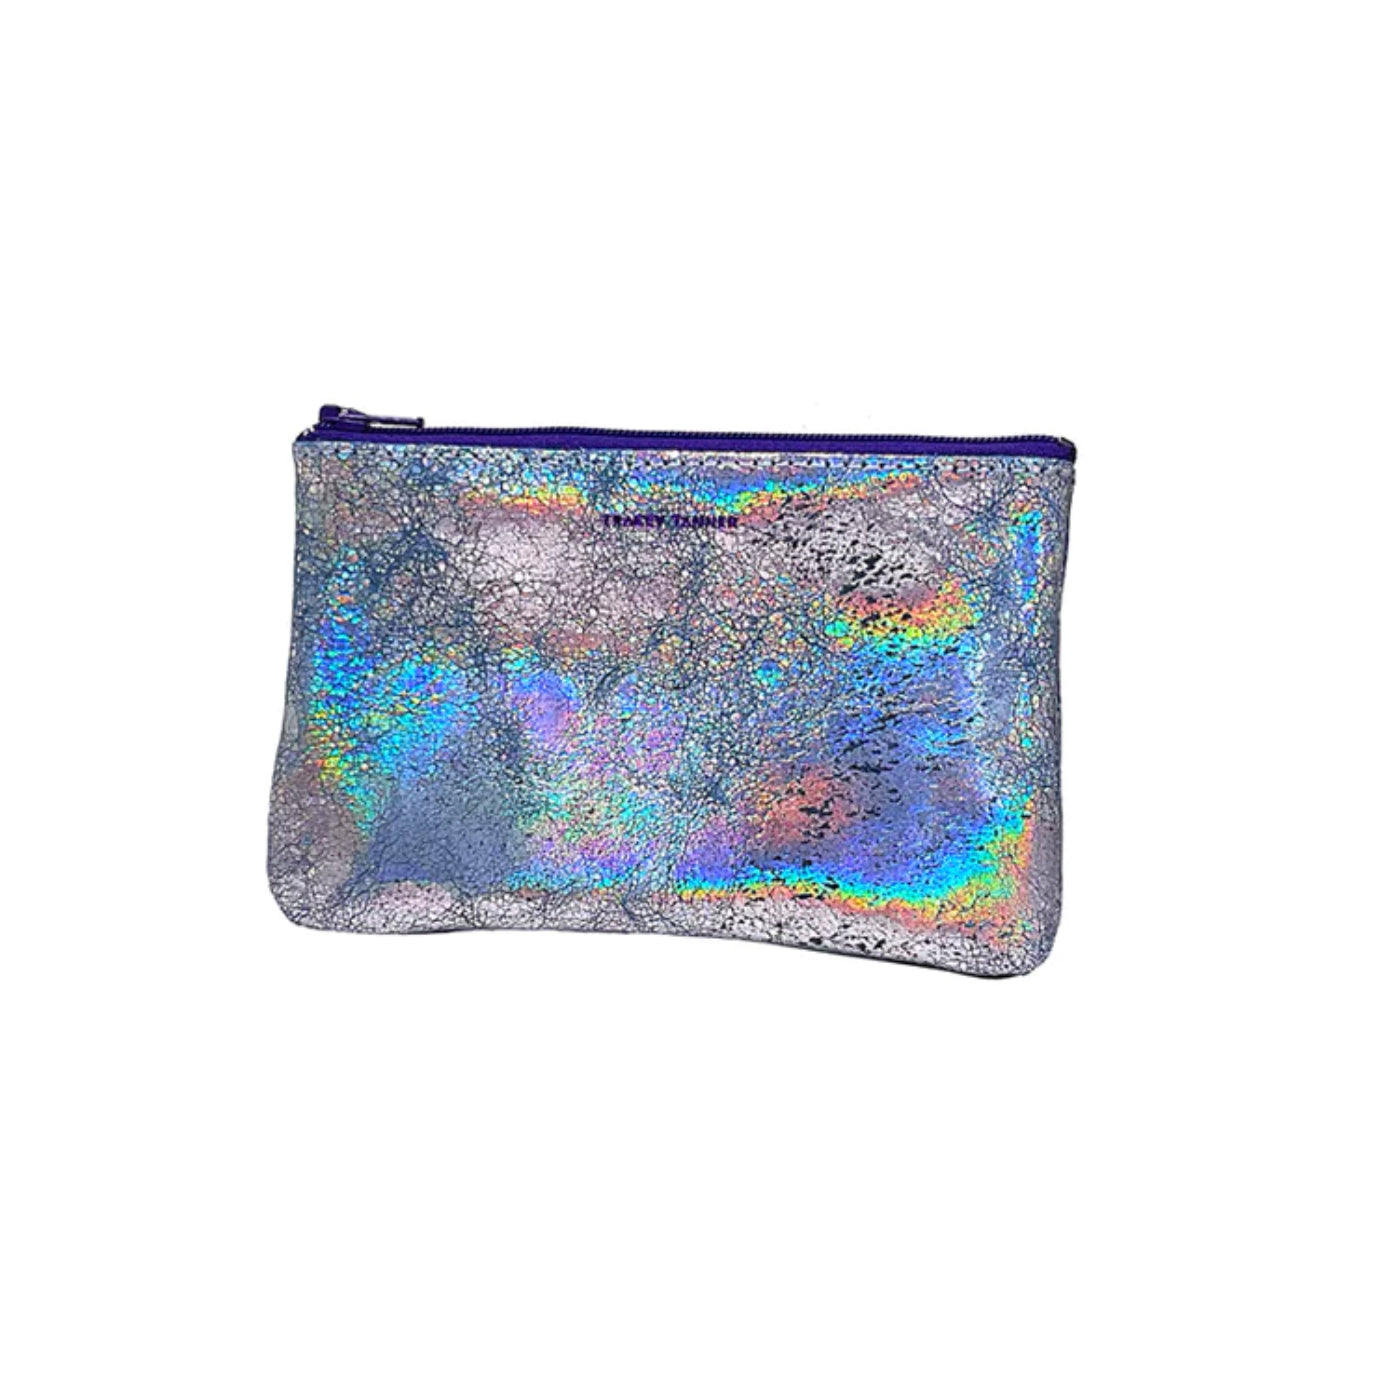 Tracey Tanner Medium Flat Zip leather Pouch Hologram